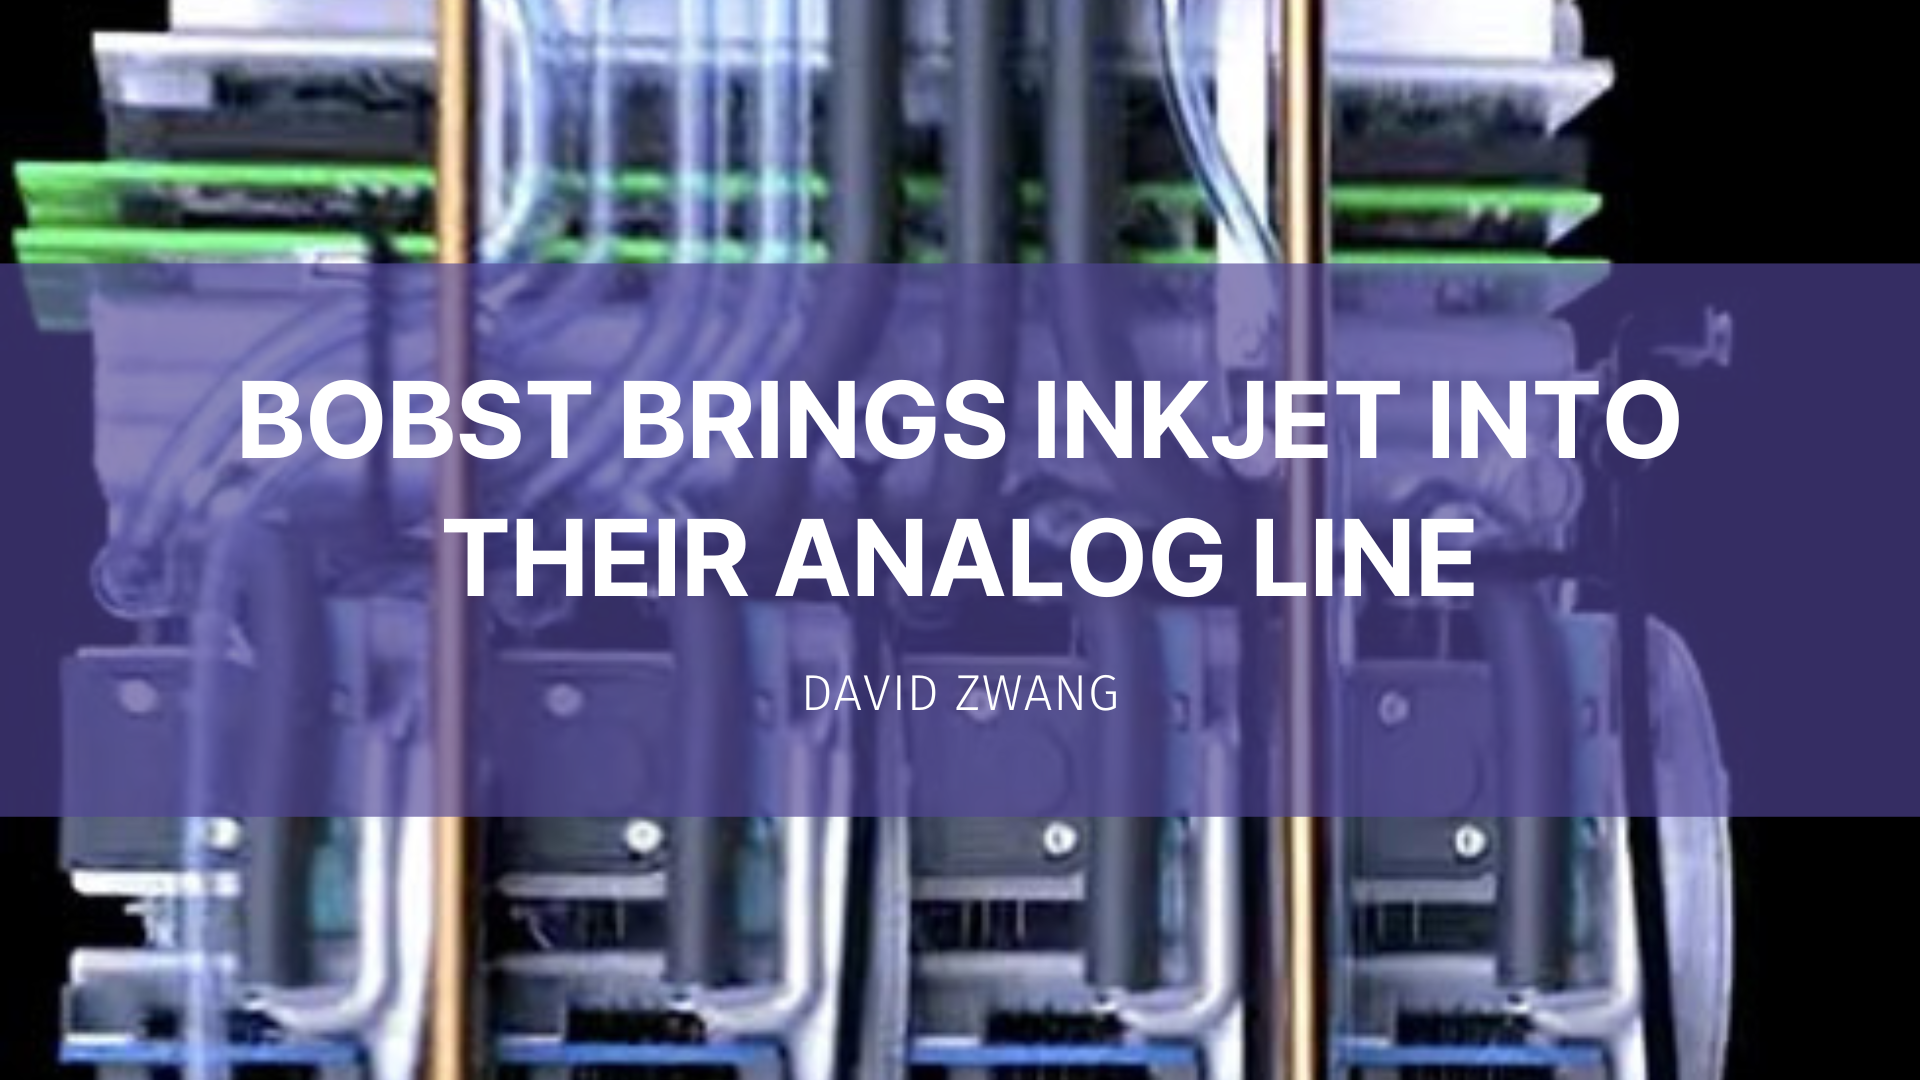 Featured image for “Bobst brings inkjet into their analog line”